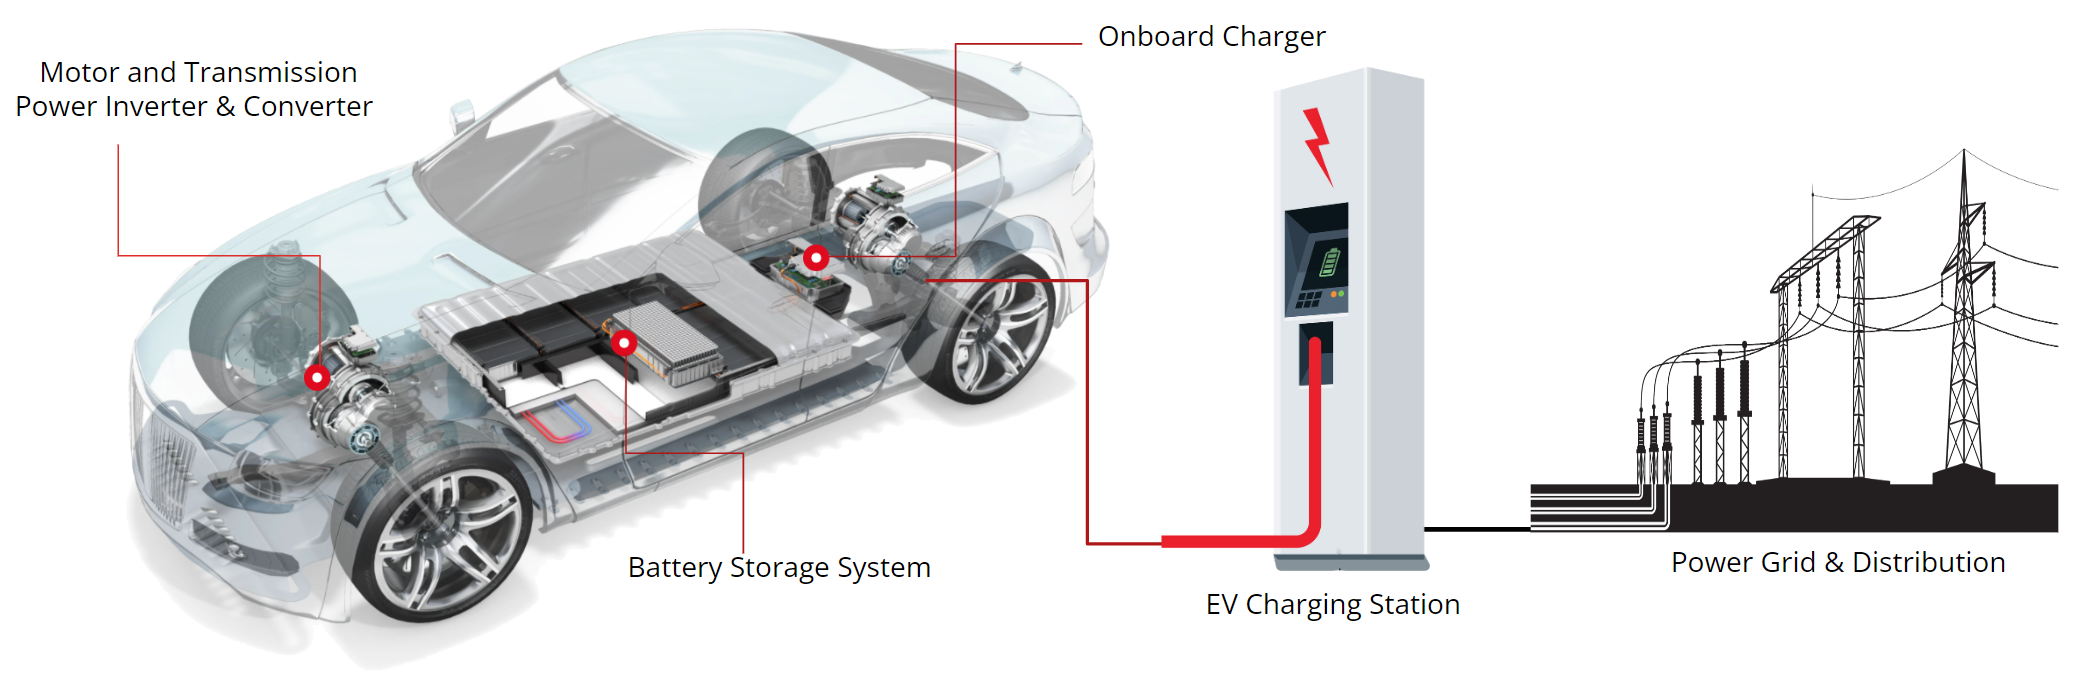 E-mobility is all about the interconnectivity, electricity generation, distribution, charging and storage opportunities it brings